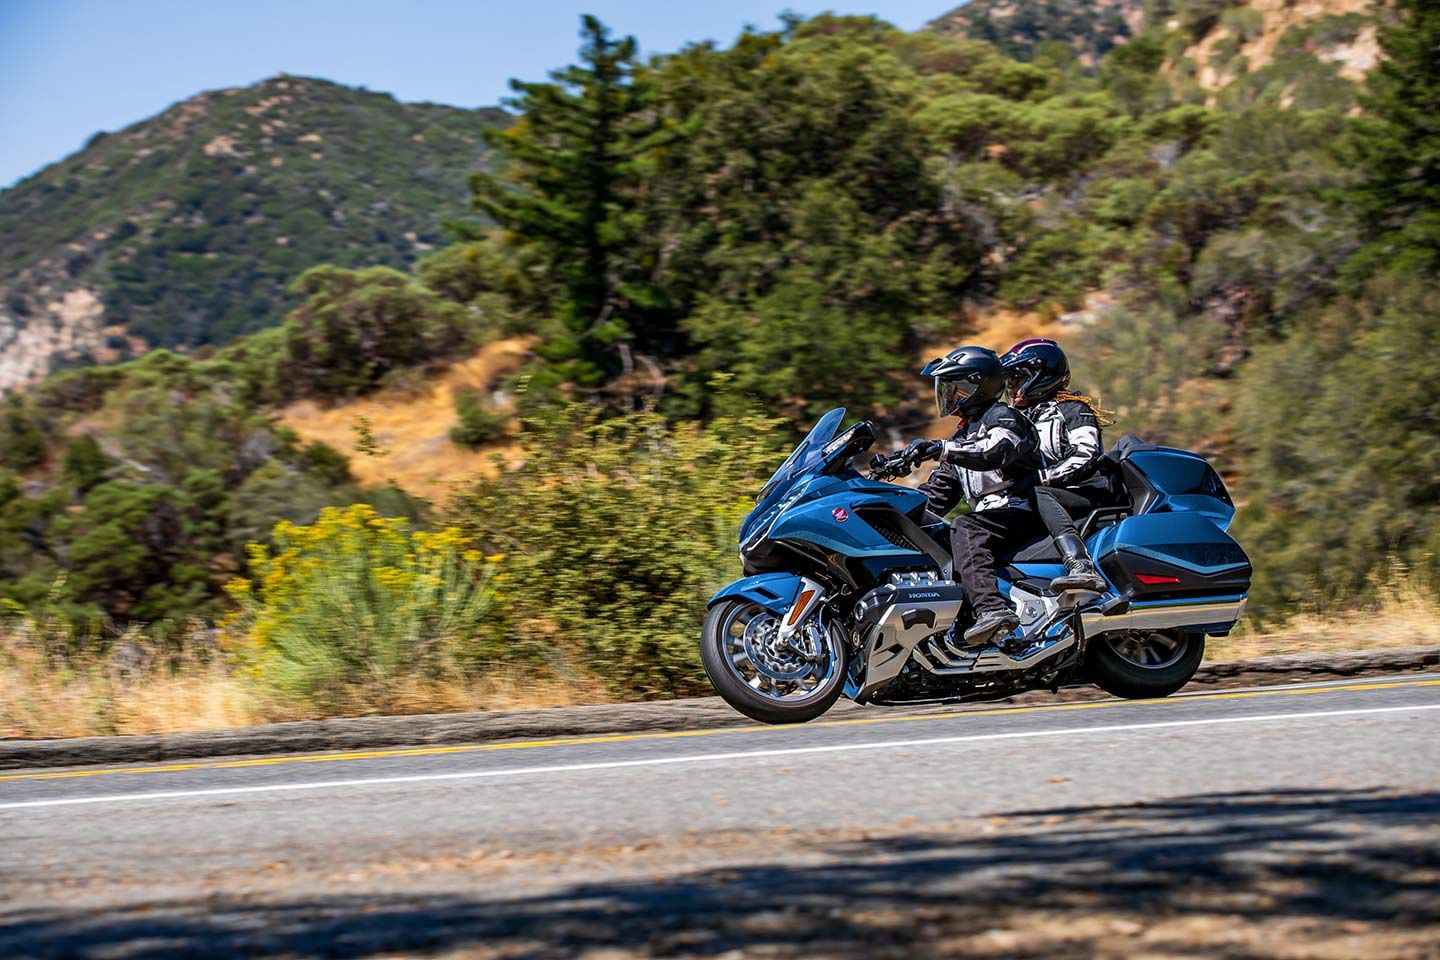 The Honda Gold Wing is the epitome of comfort and class on two wheels.